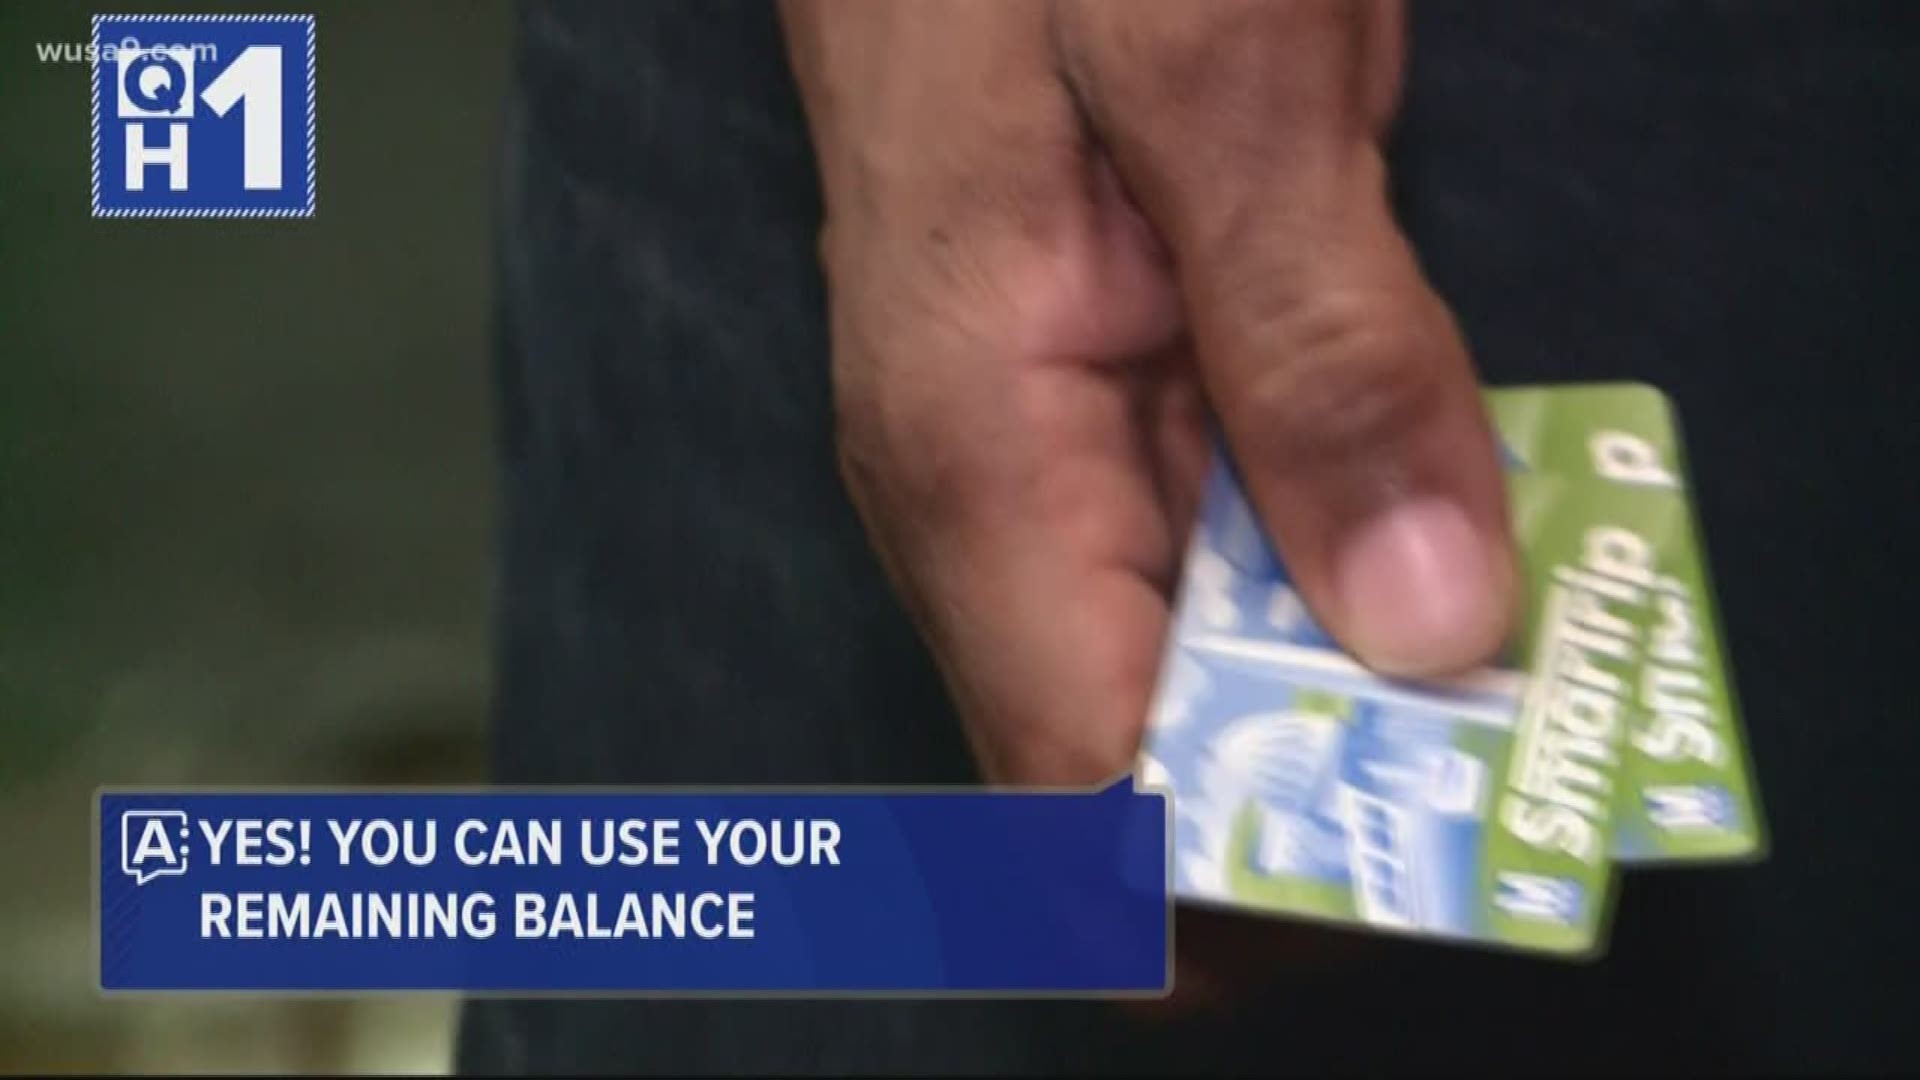 Metro says you can use up the remaining balance on your smartrip card. Watch to find out what happens if you go over.